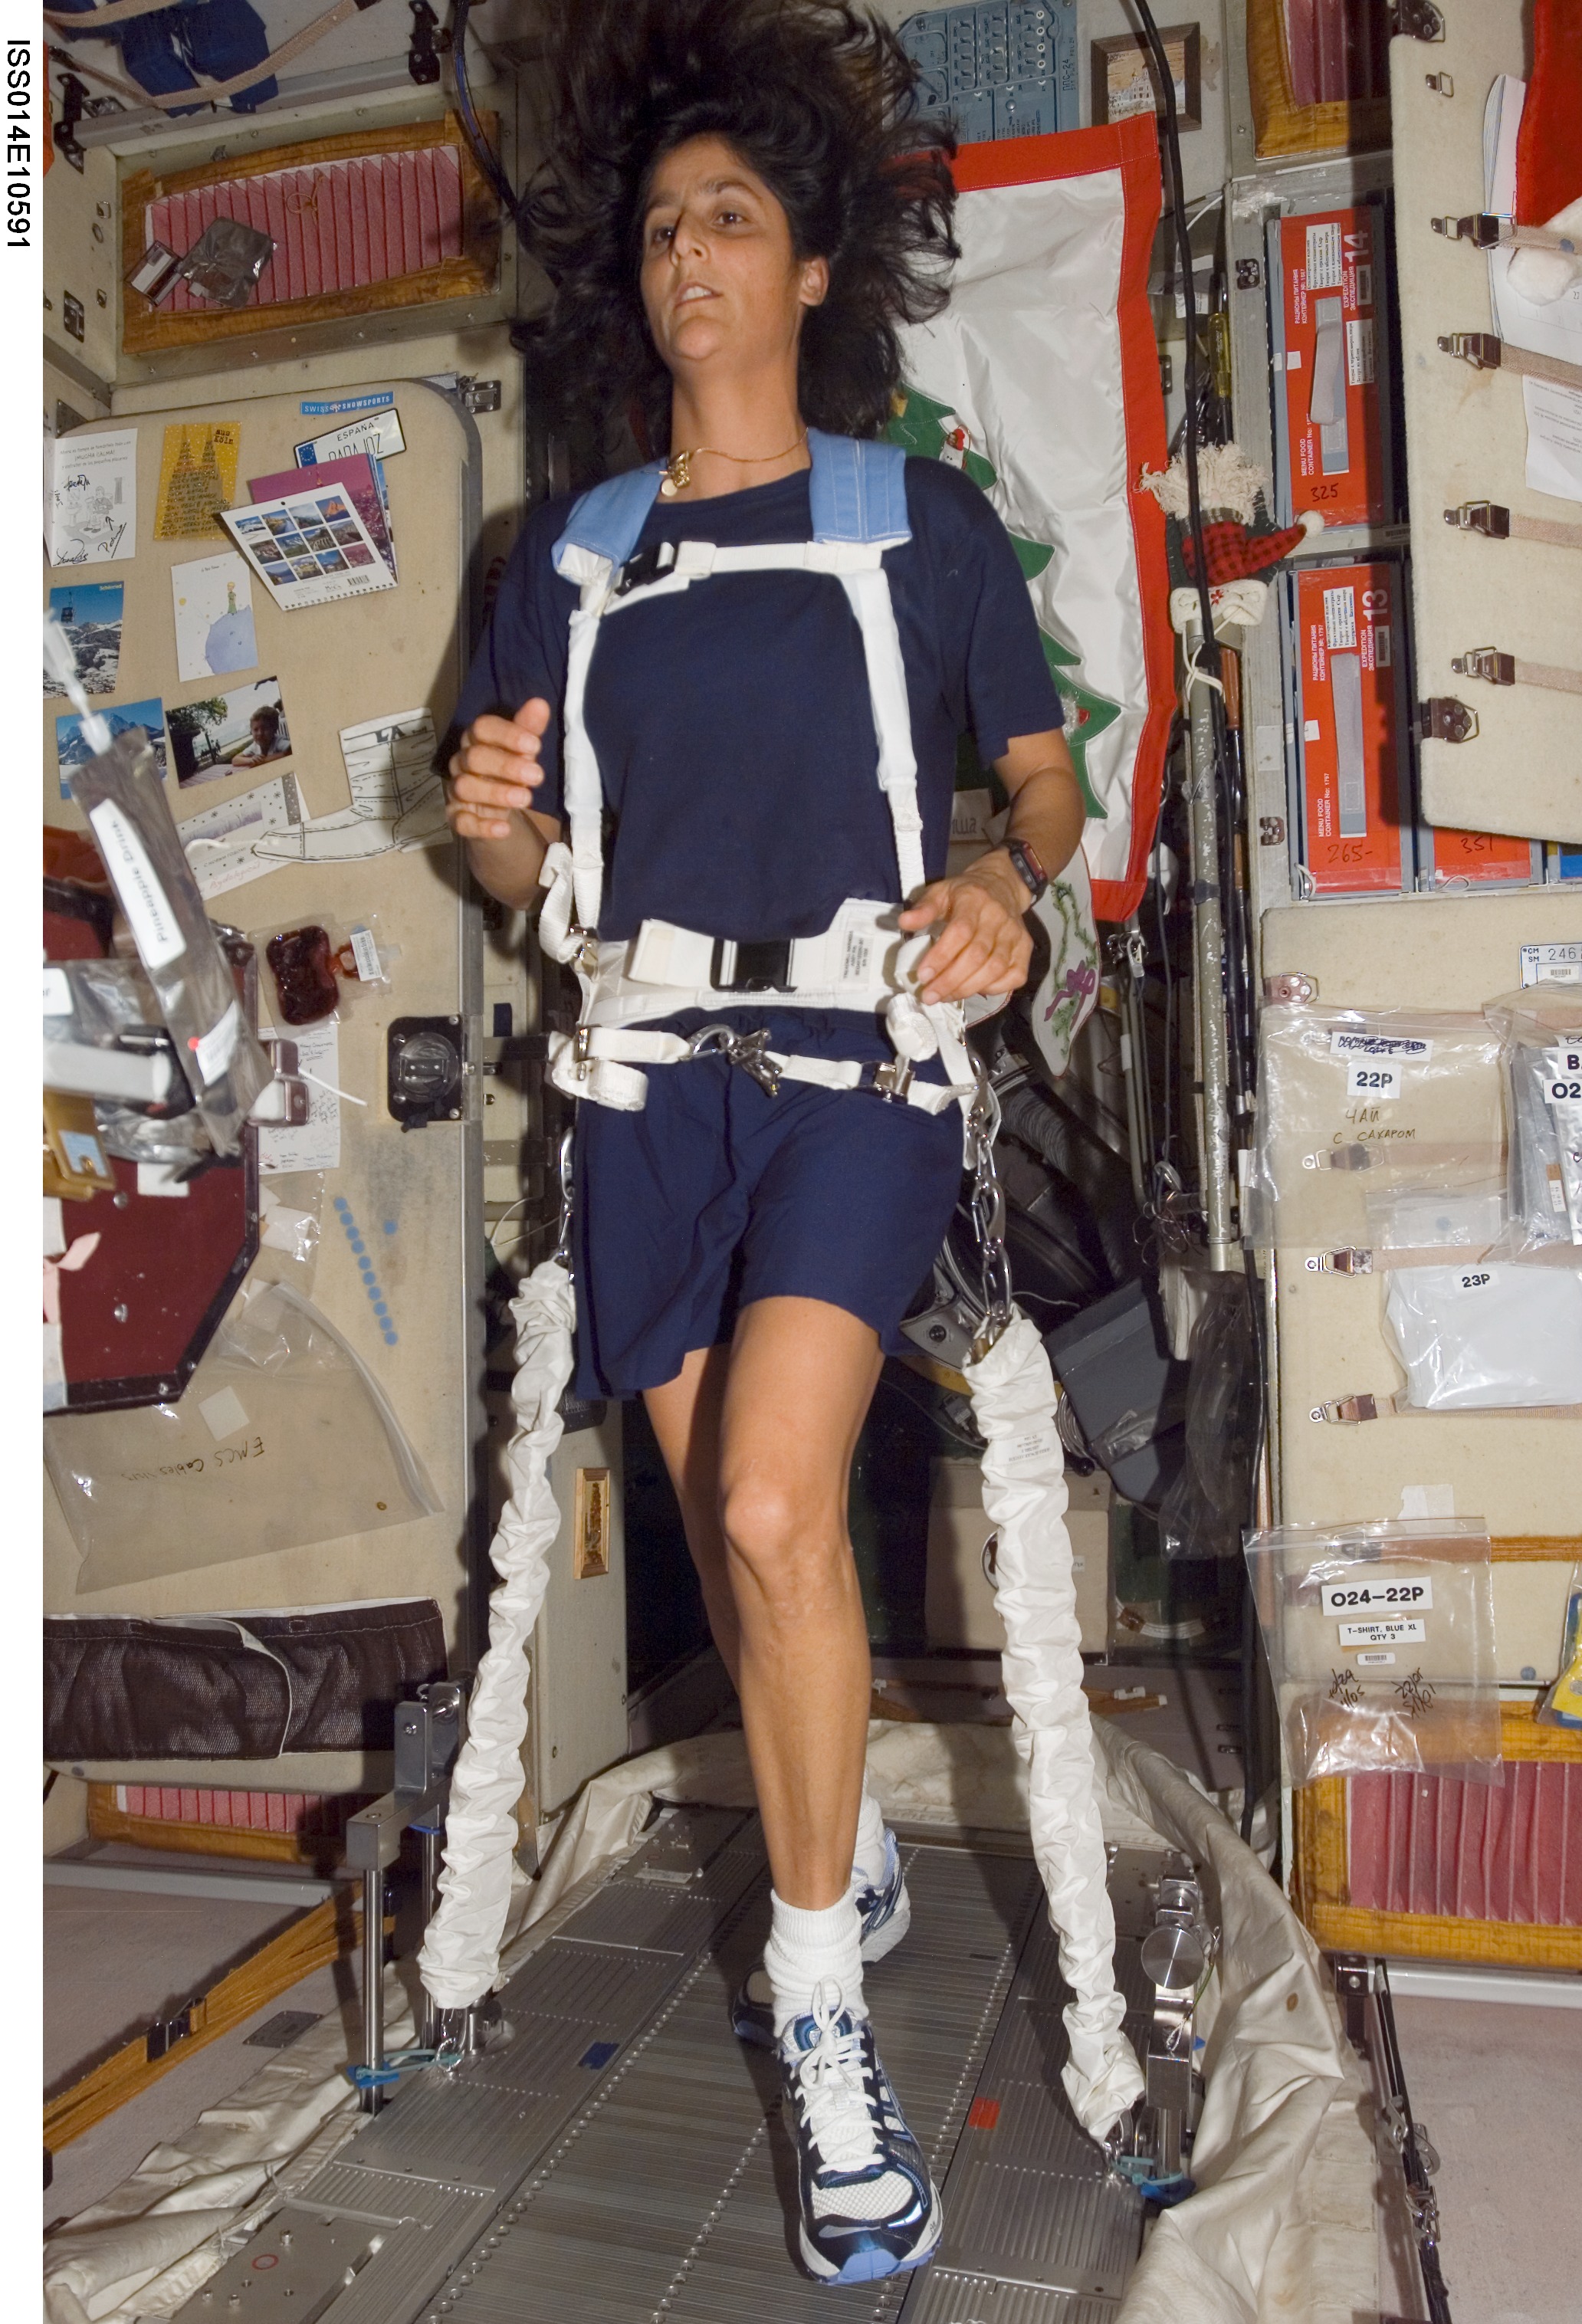 An astronaut exercising in space